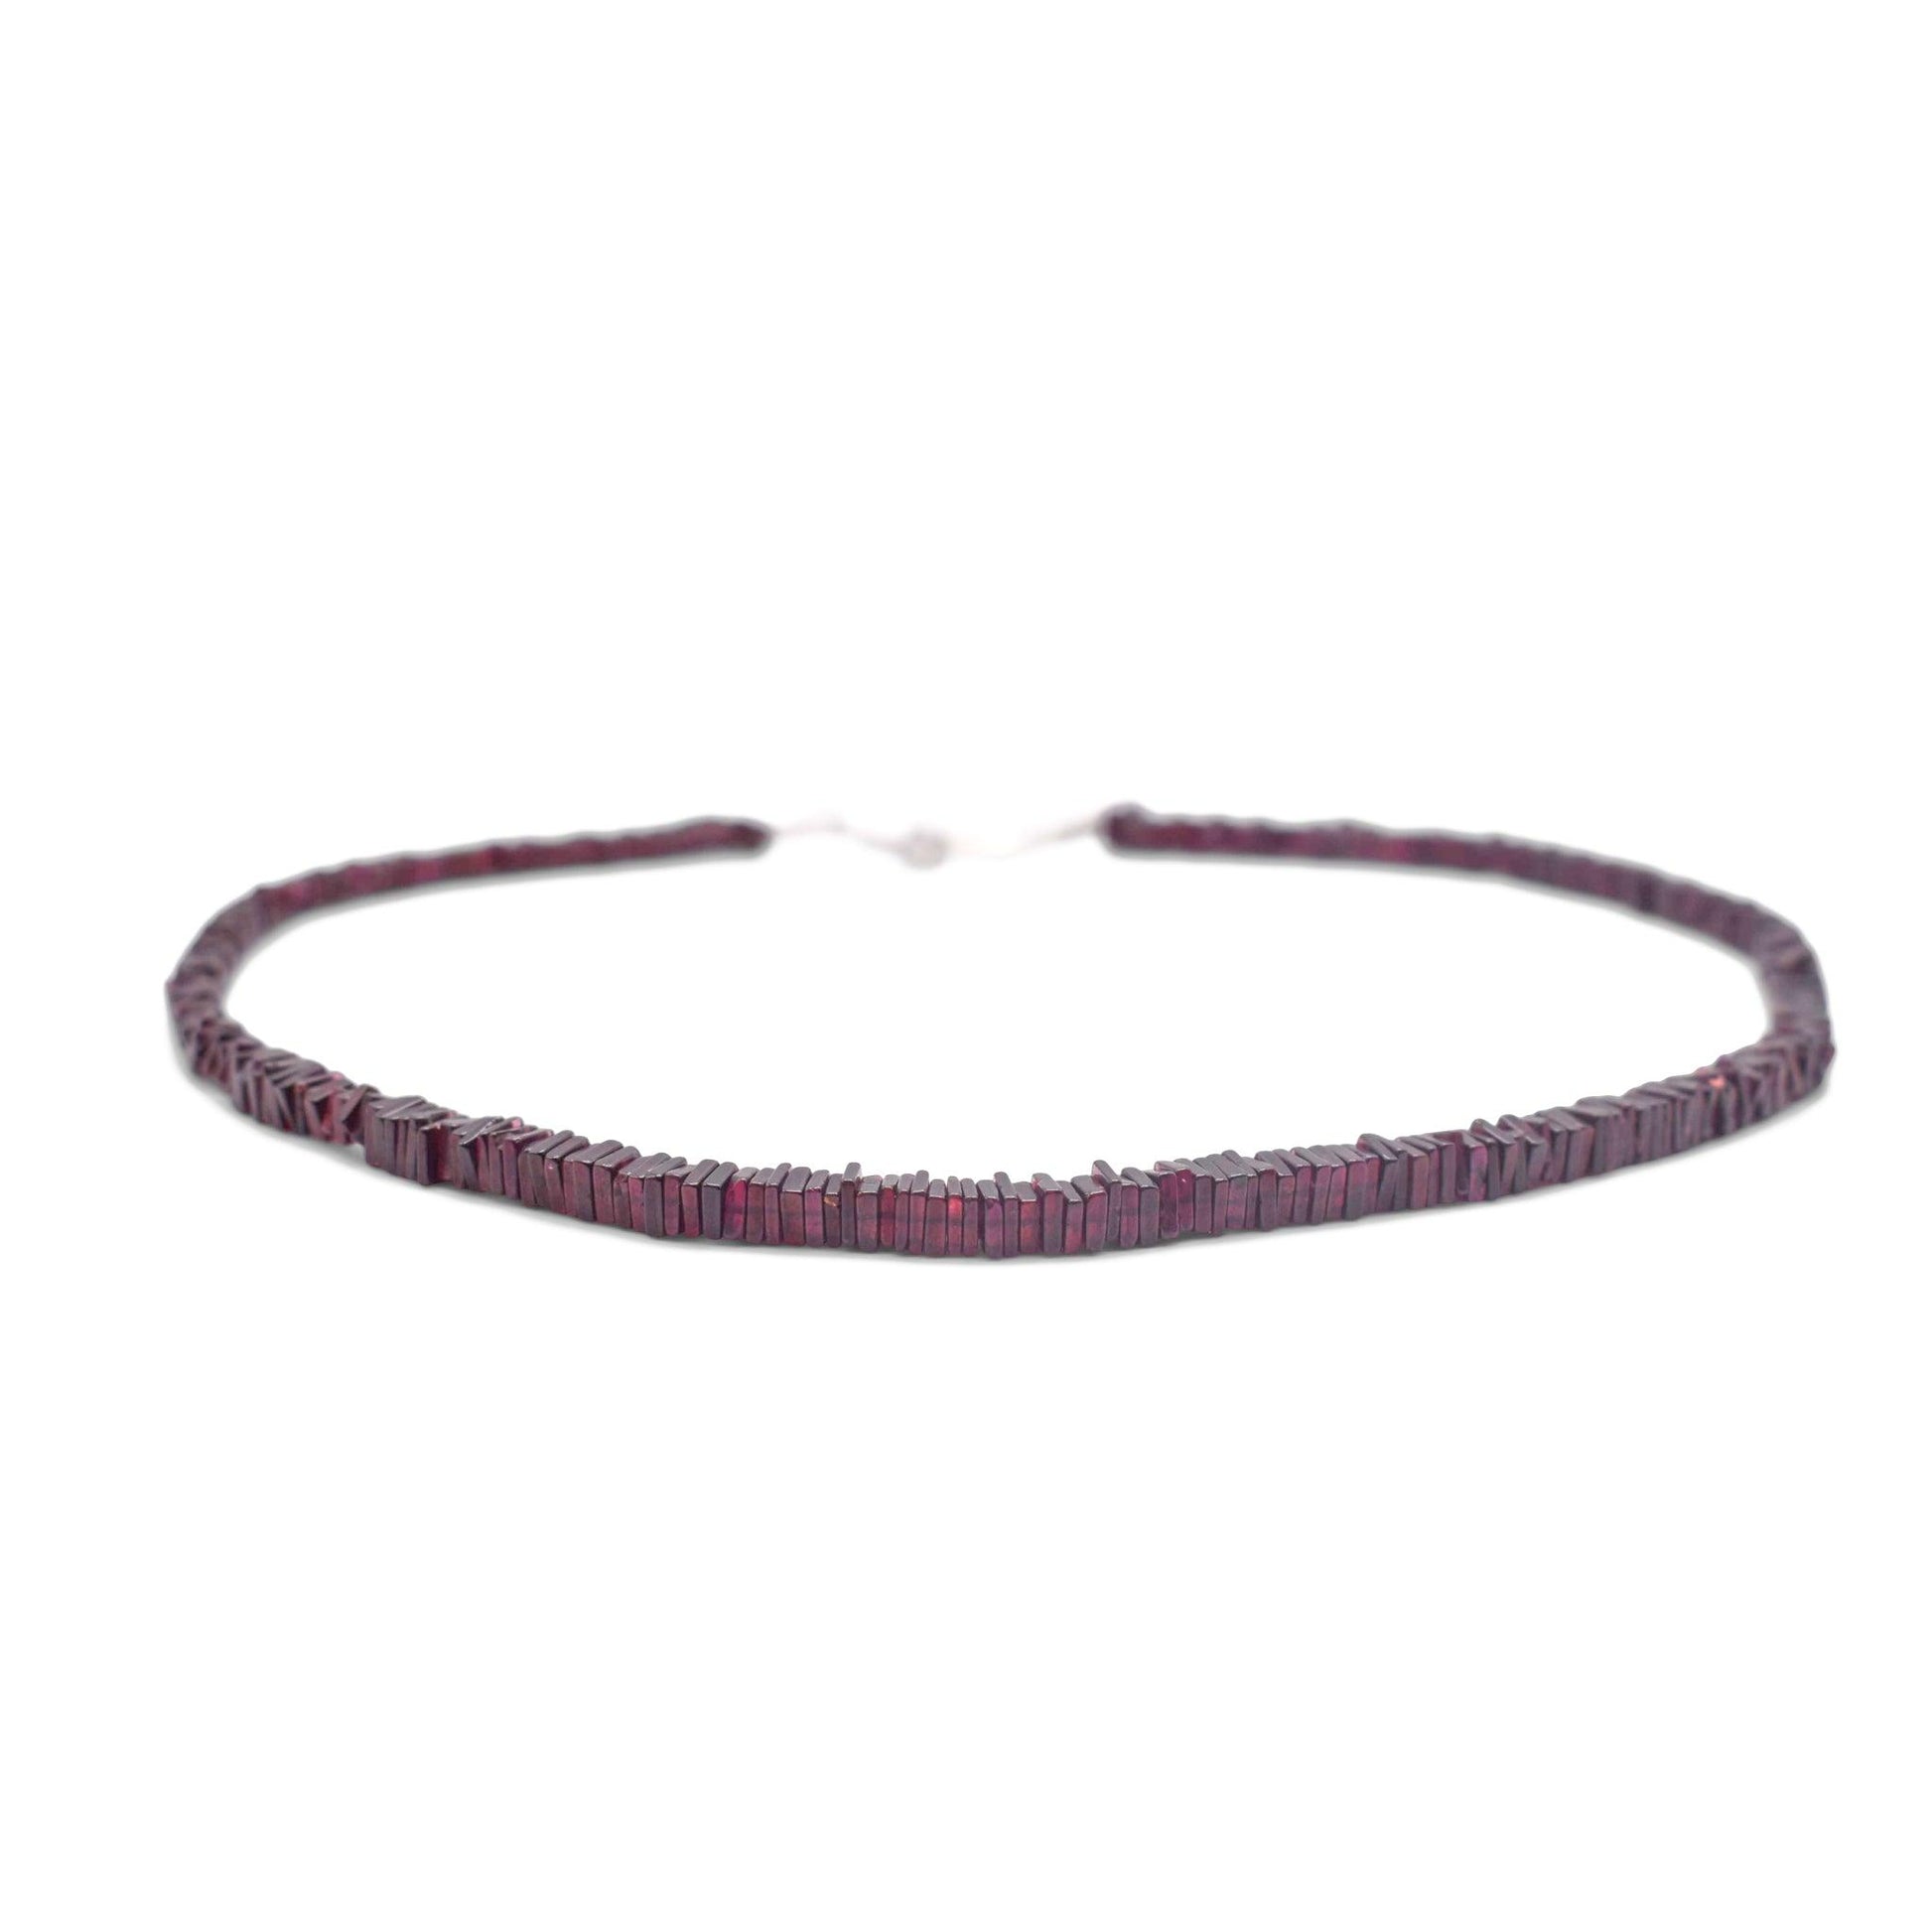 Garnet heishi beads necklace front angle 